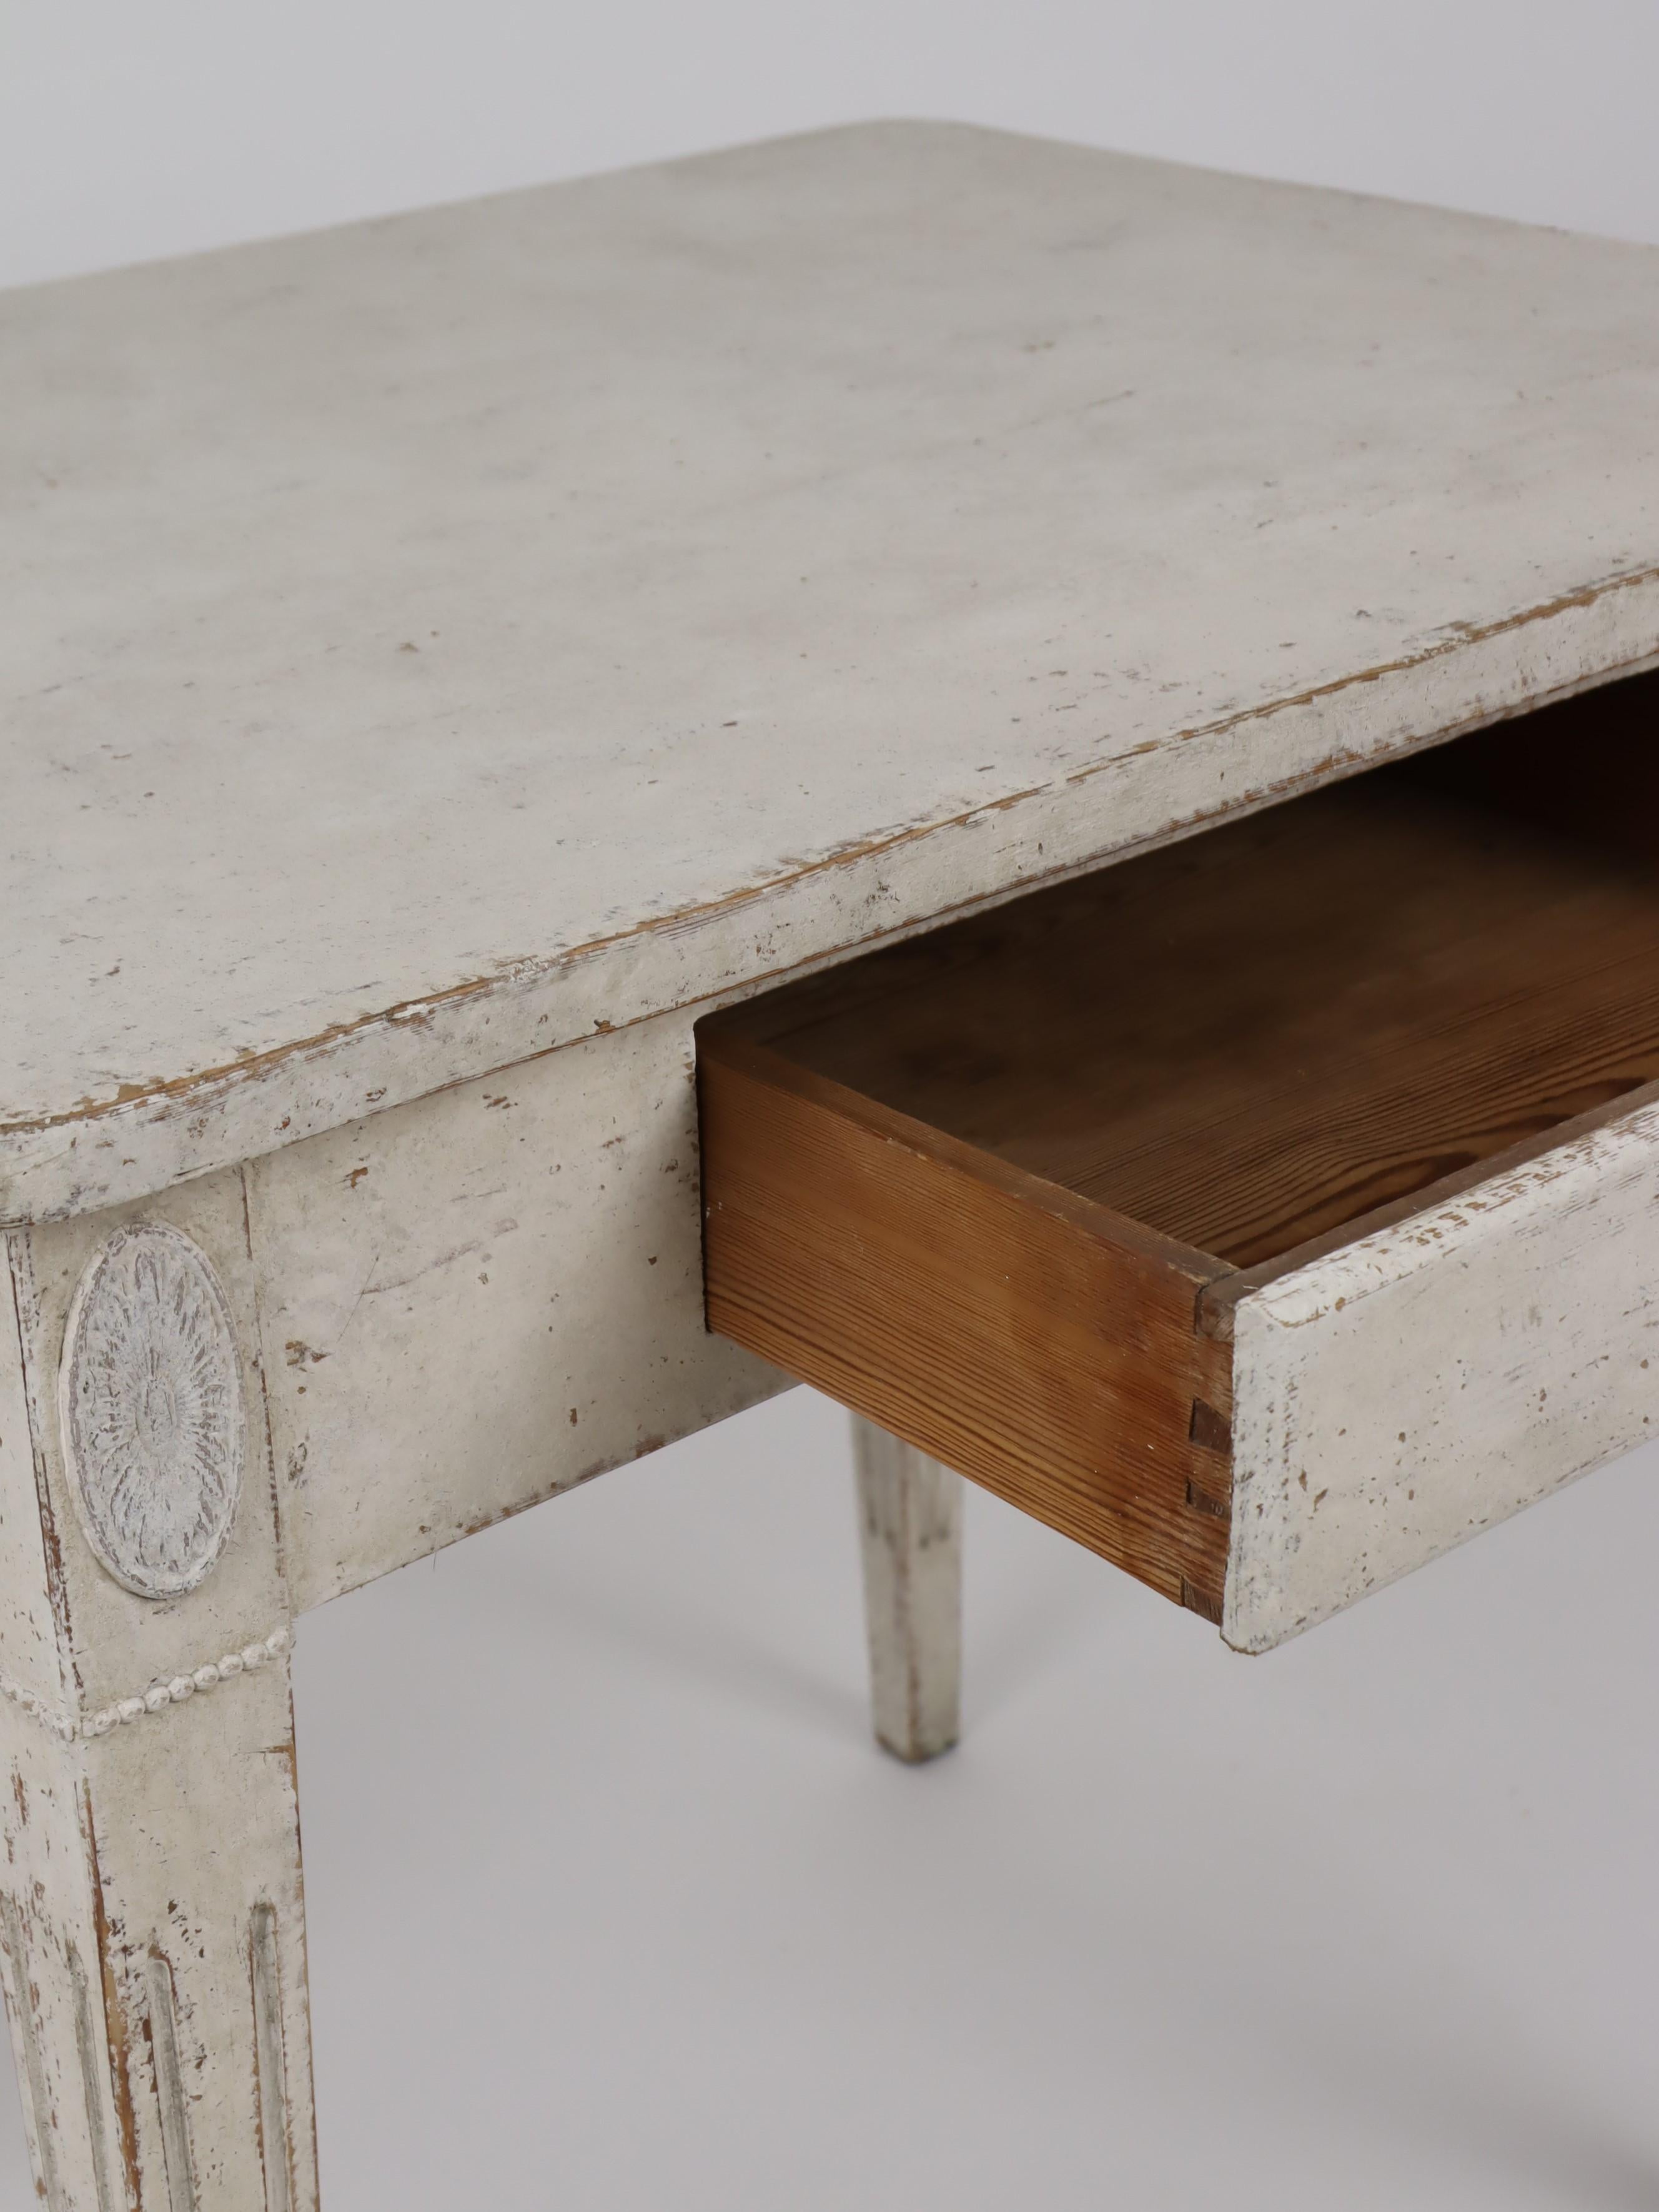 19th Century Swedish Gustavian Style 1850s Painted Desk with Single Drawer and Tapered Legs For Sale